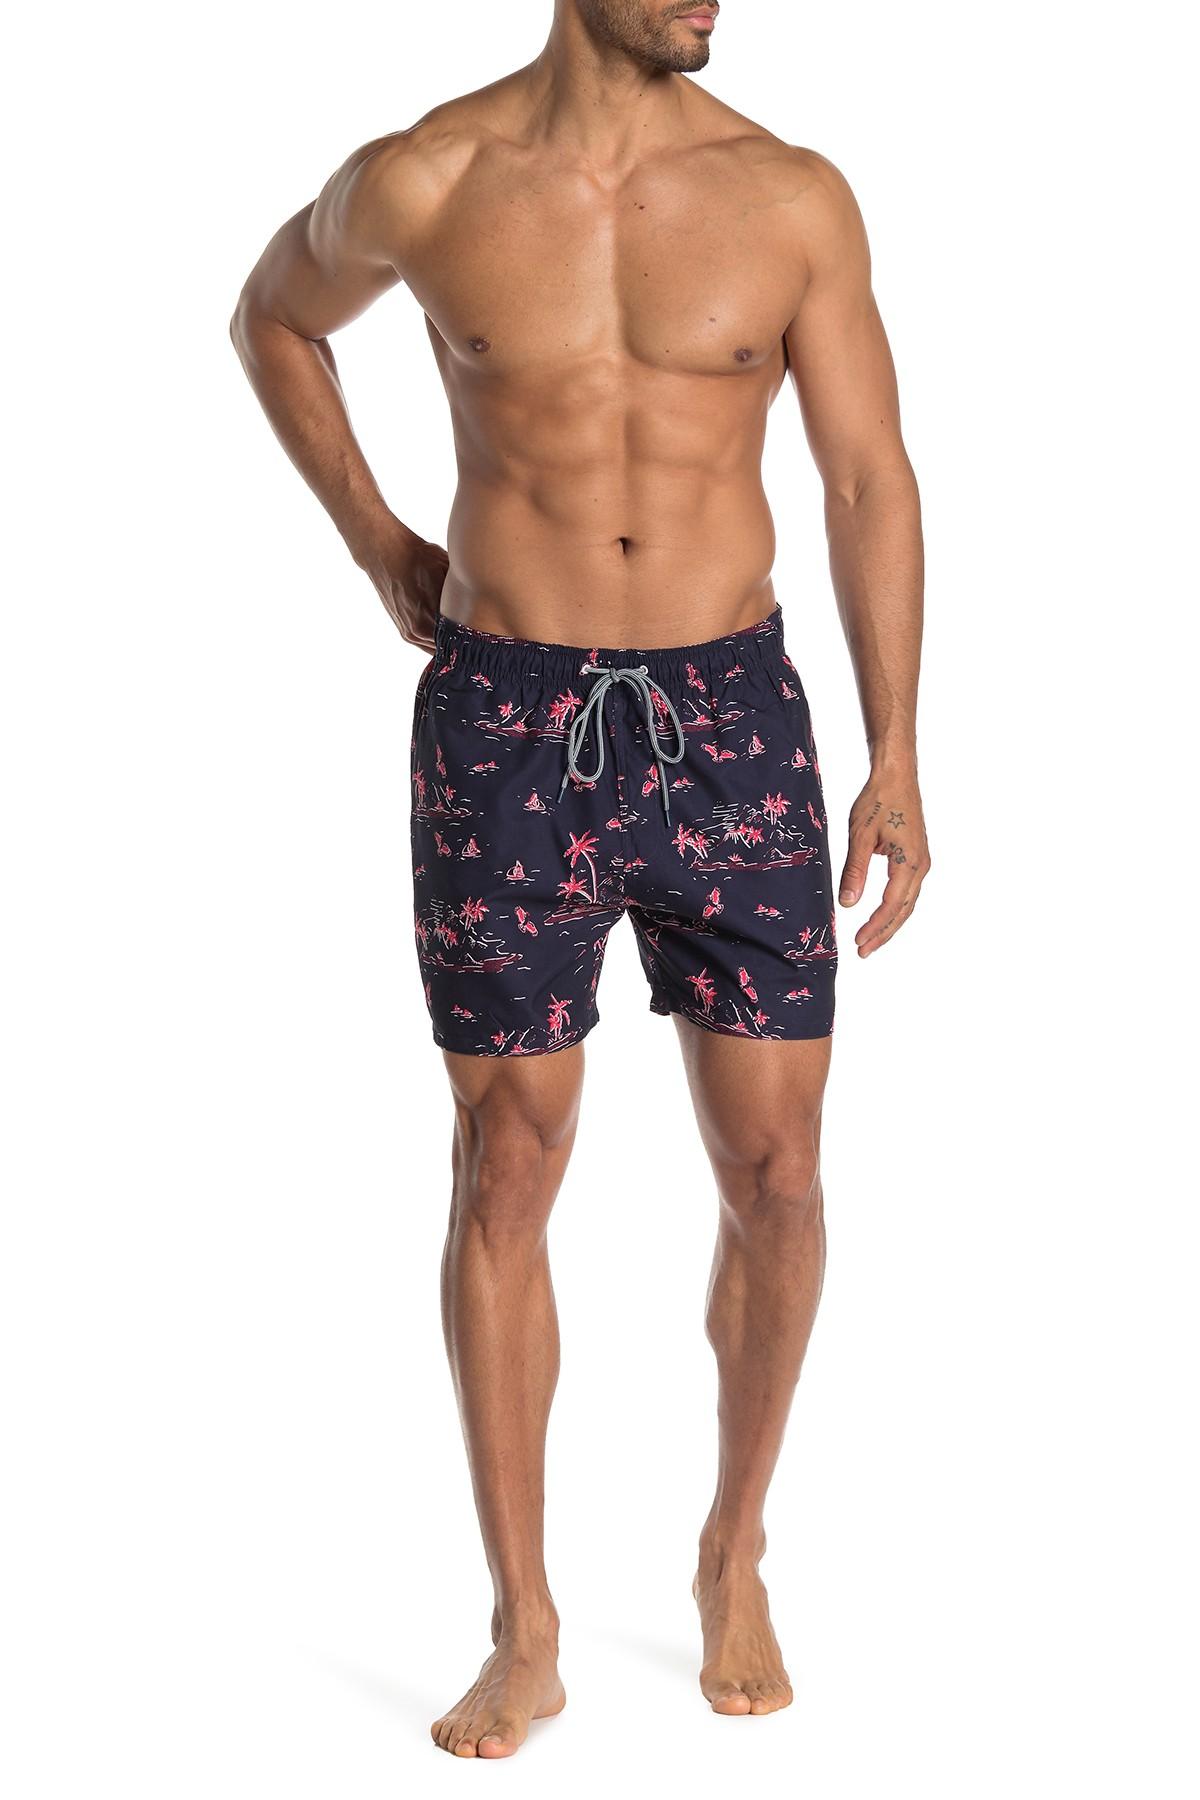 Ted Baker Synthetic Island Print Swim Shorts in Navy (Blue) for Men - Lyst